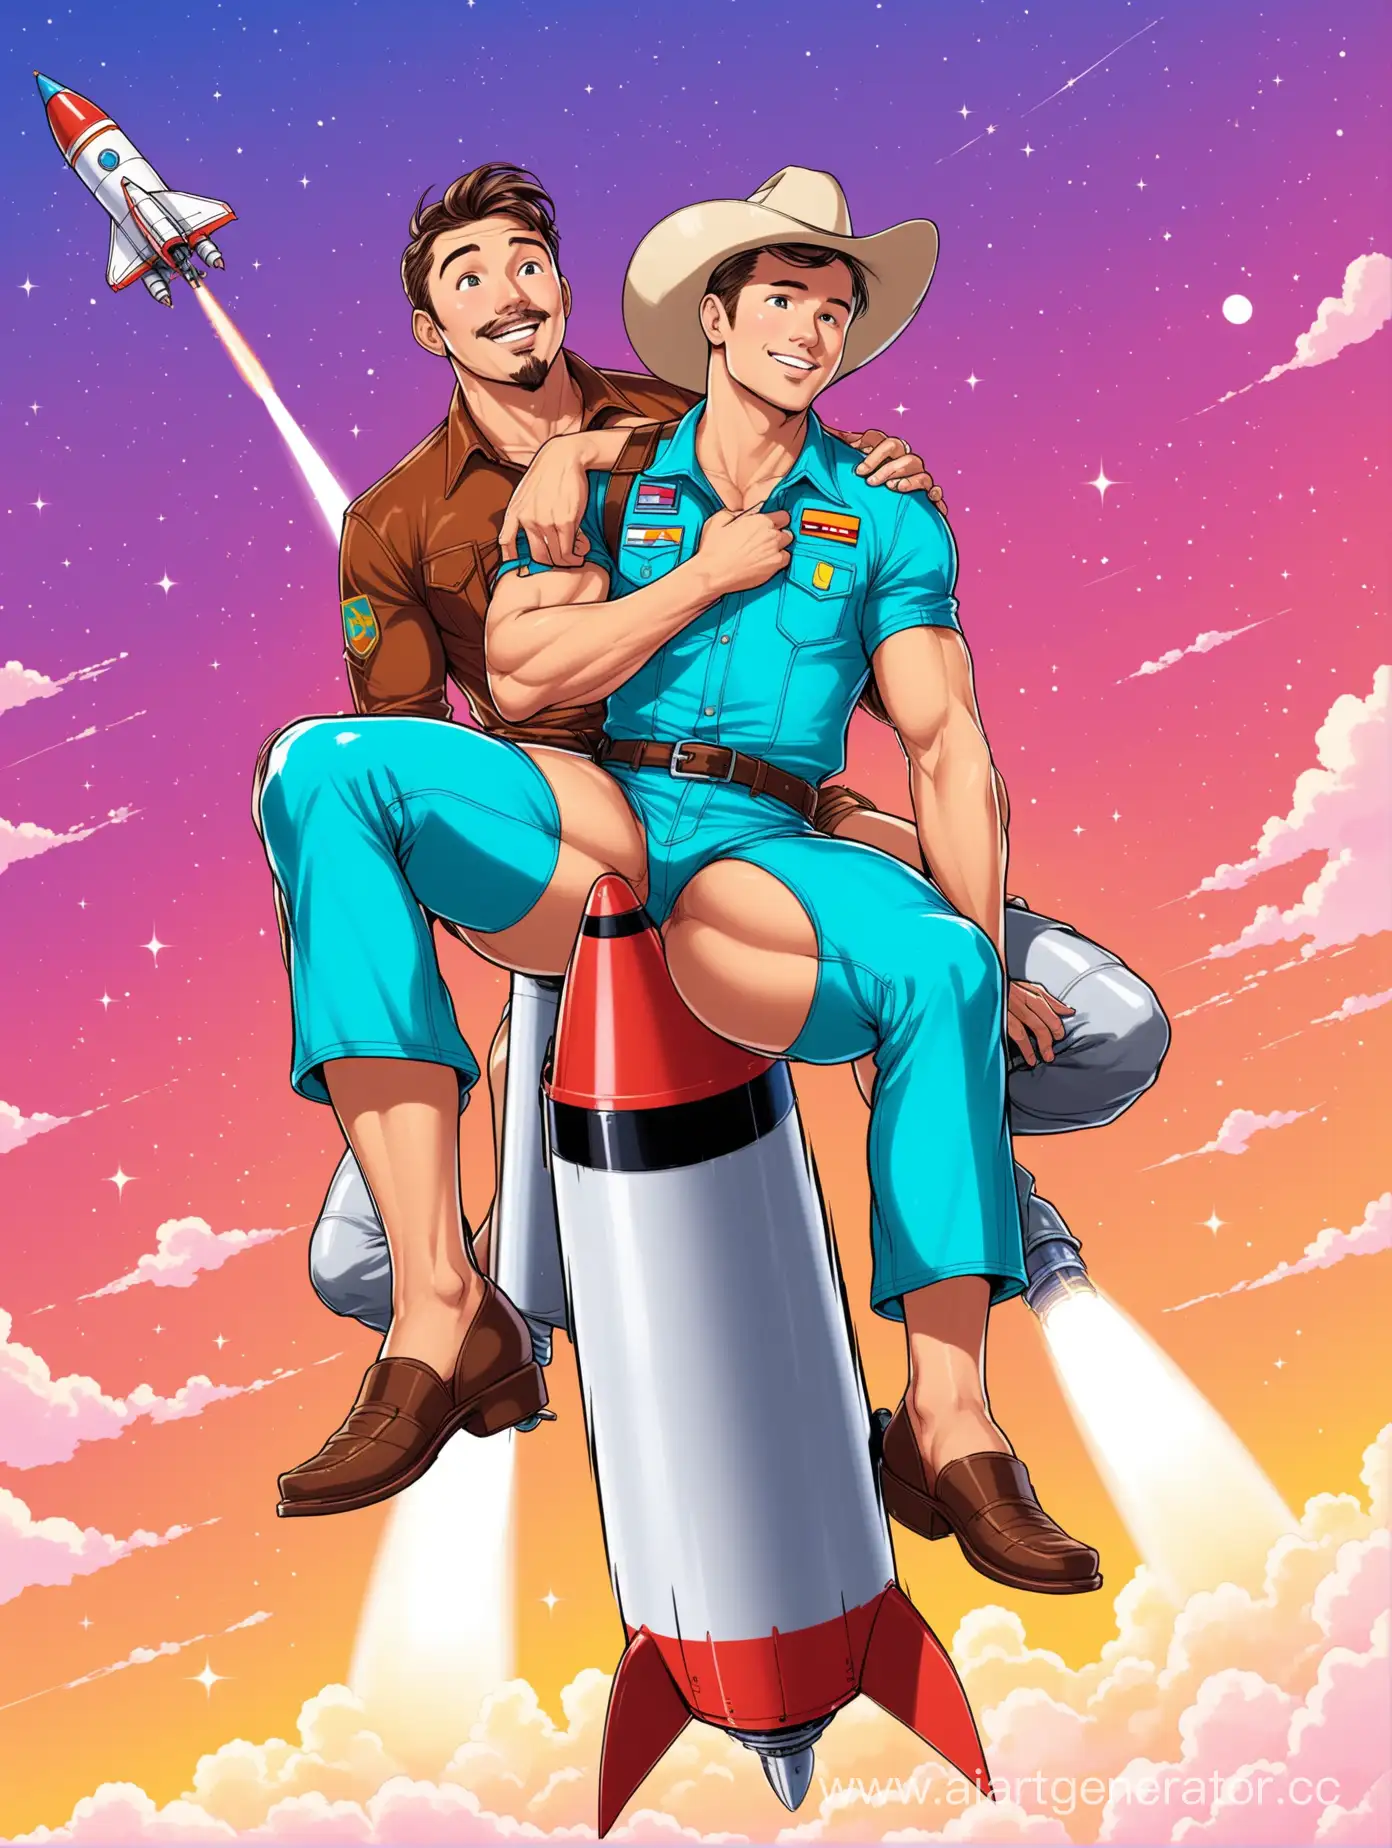 Flirtatious-Cowboy-on-Rocket-Flies-to-Kazakhstan-for-Date-with-Gay-Plumber